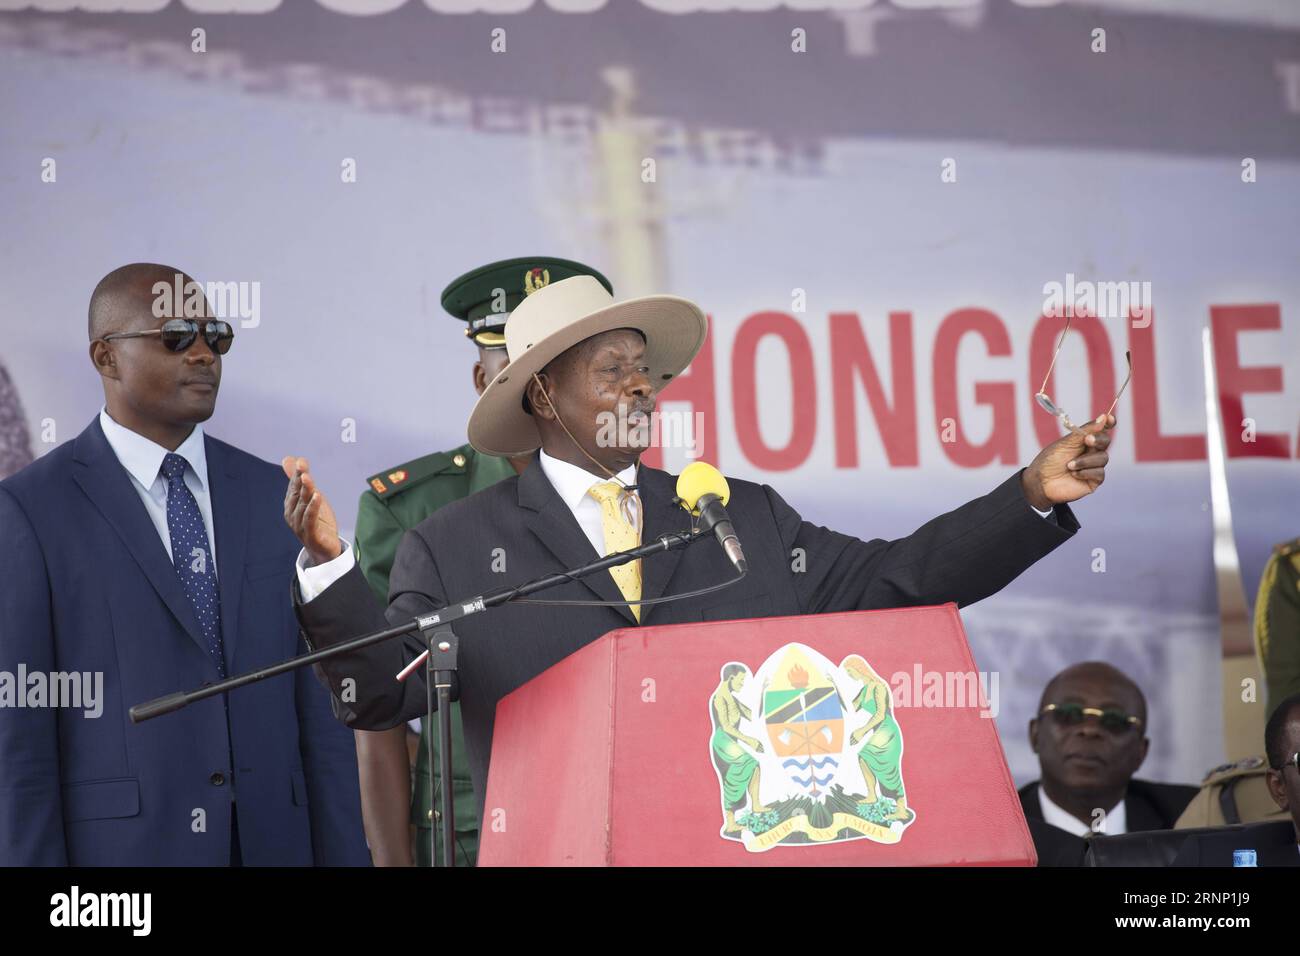 (170806) -- ARUSHA, Aug. 6, 2017 -- Ugandan President Yoweri Museveni (C) speaks at the foundation-laying ceremony for the construction of a crude oil pipeline from Hoima in Uganda to Tanzania s Indian Ocean seaport of Tanga in Tanga, Tanzania, Aug. 5, 2017. ) (yk) TANZANIA-ARUSHA-OIL PIPELINE-FOUNDATION Stringer PUBLICATIONxNOTxINxCHN   Arusha Aug 6 2017 Ugandan President Yoweri Museveni Veni C Speaks AT The Foundation Laying Ceremony for The Construction of a Crude Oil Pipeline from  in Uganda to Tanzania S Indian Ocean Seaport of Tanga in Tanga Tanzania Aug 5 2017 YK Tanzania Arusha Oil Pip Stock Photo